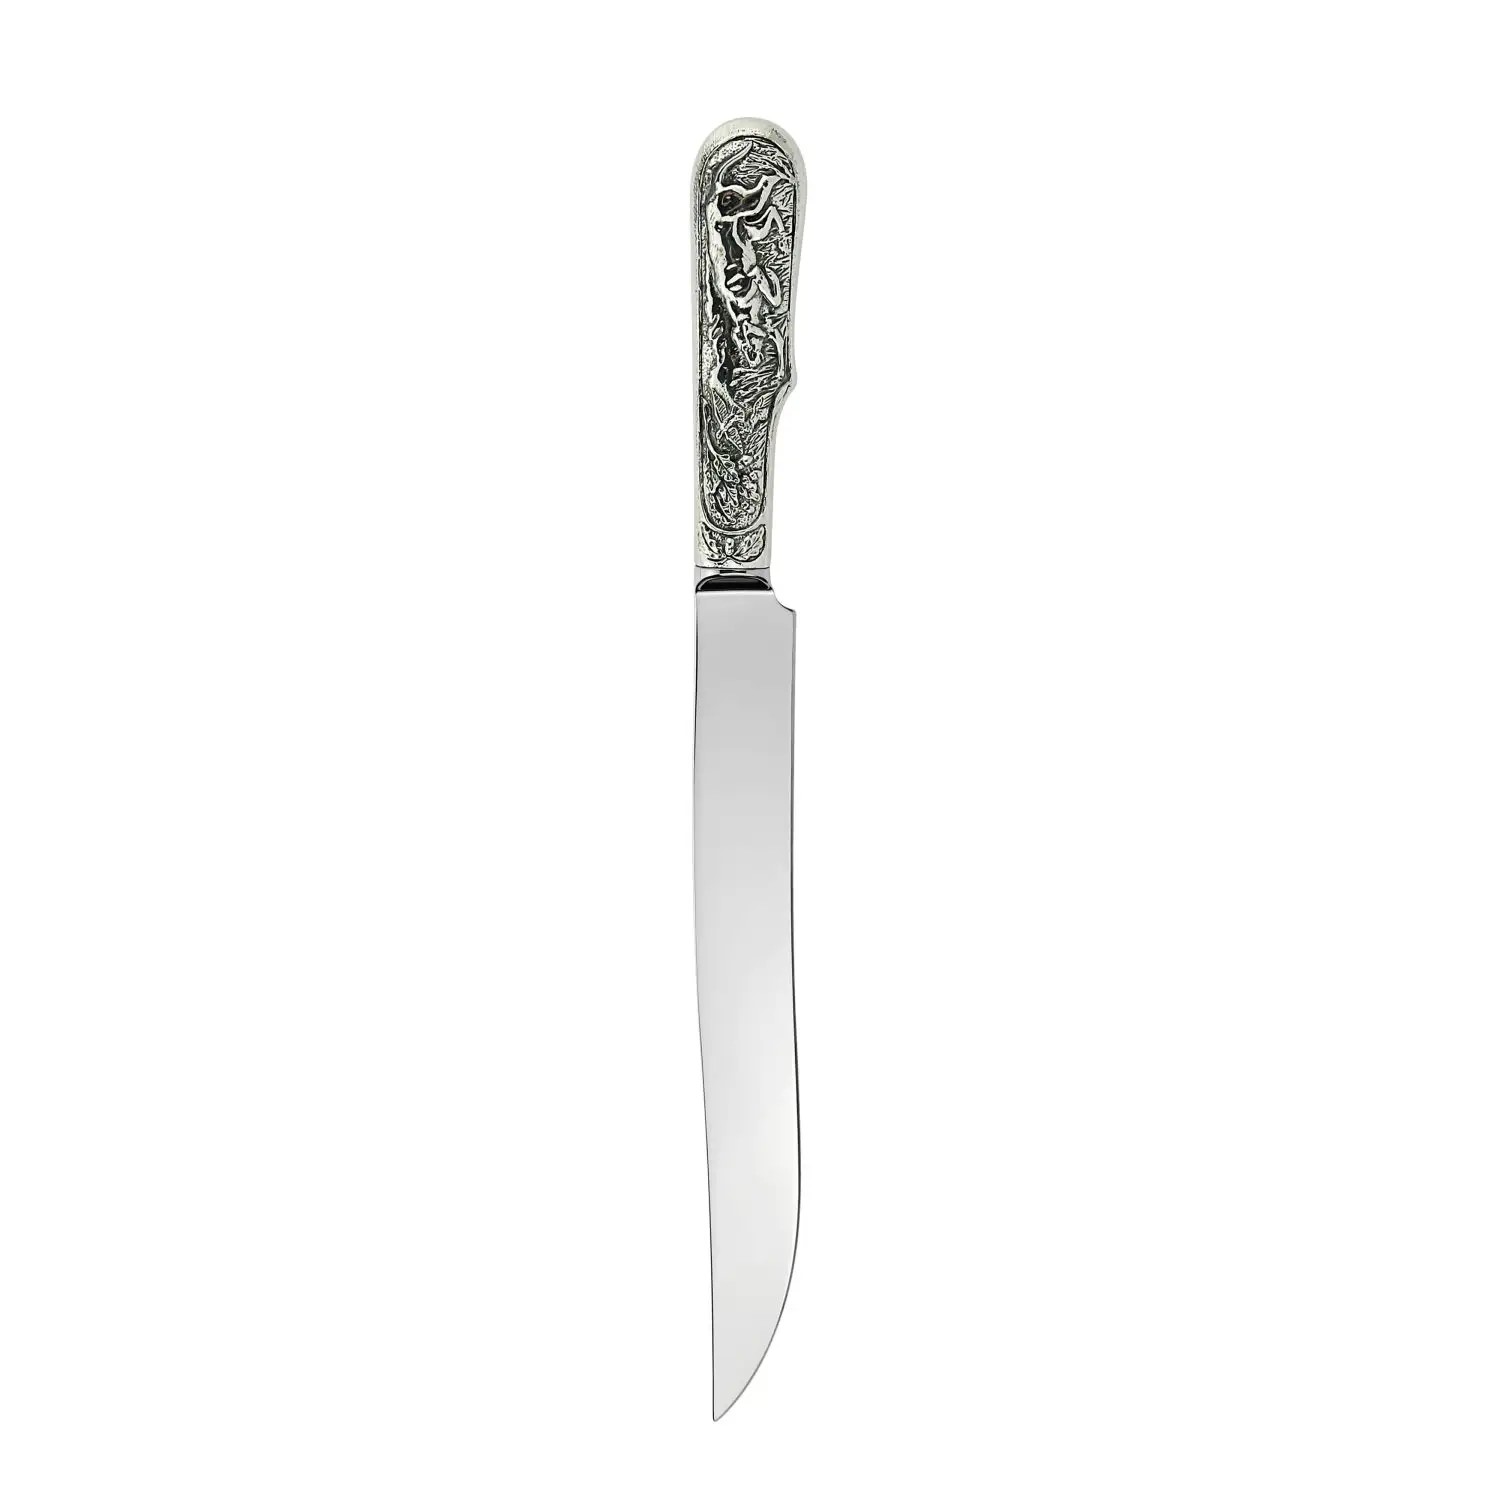 Nickel silver knives for meat